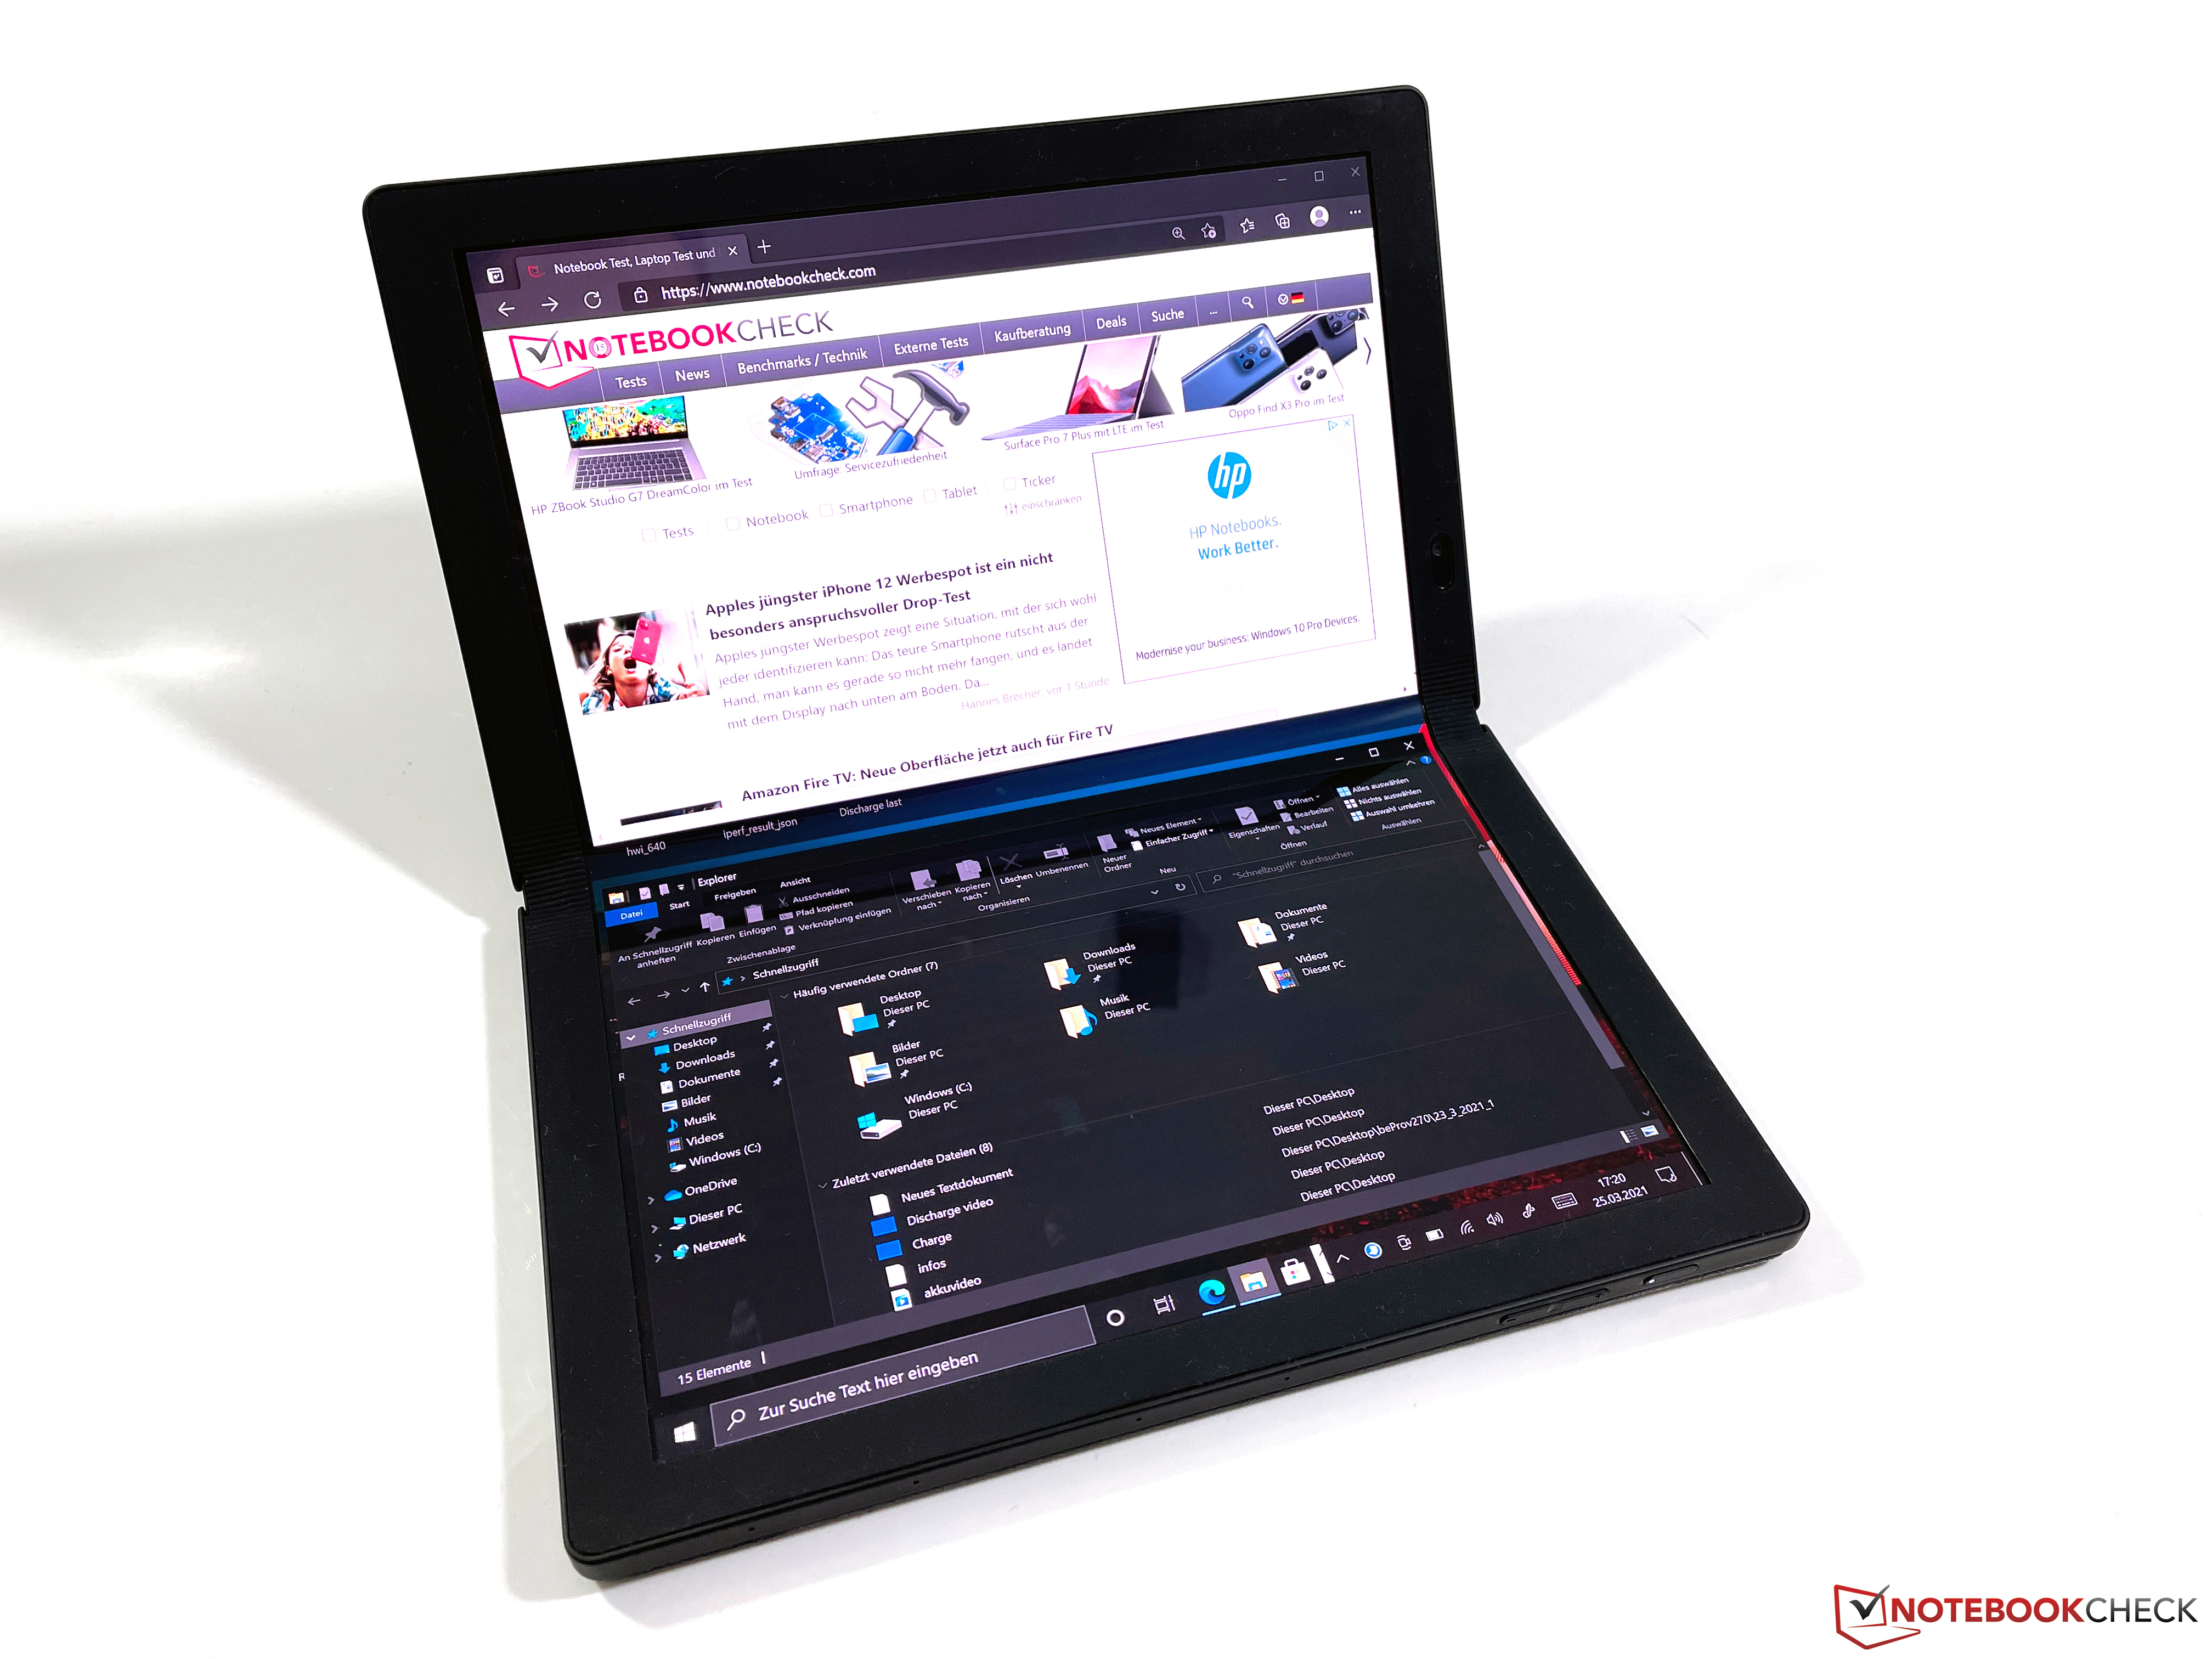 ThinkPad X1 Fold has a foldable OLED touch screen, but it’s not fun in everyday use